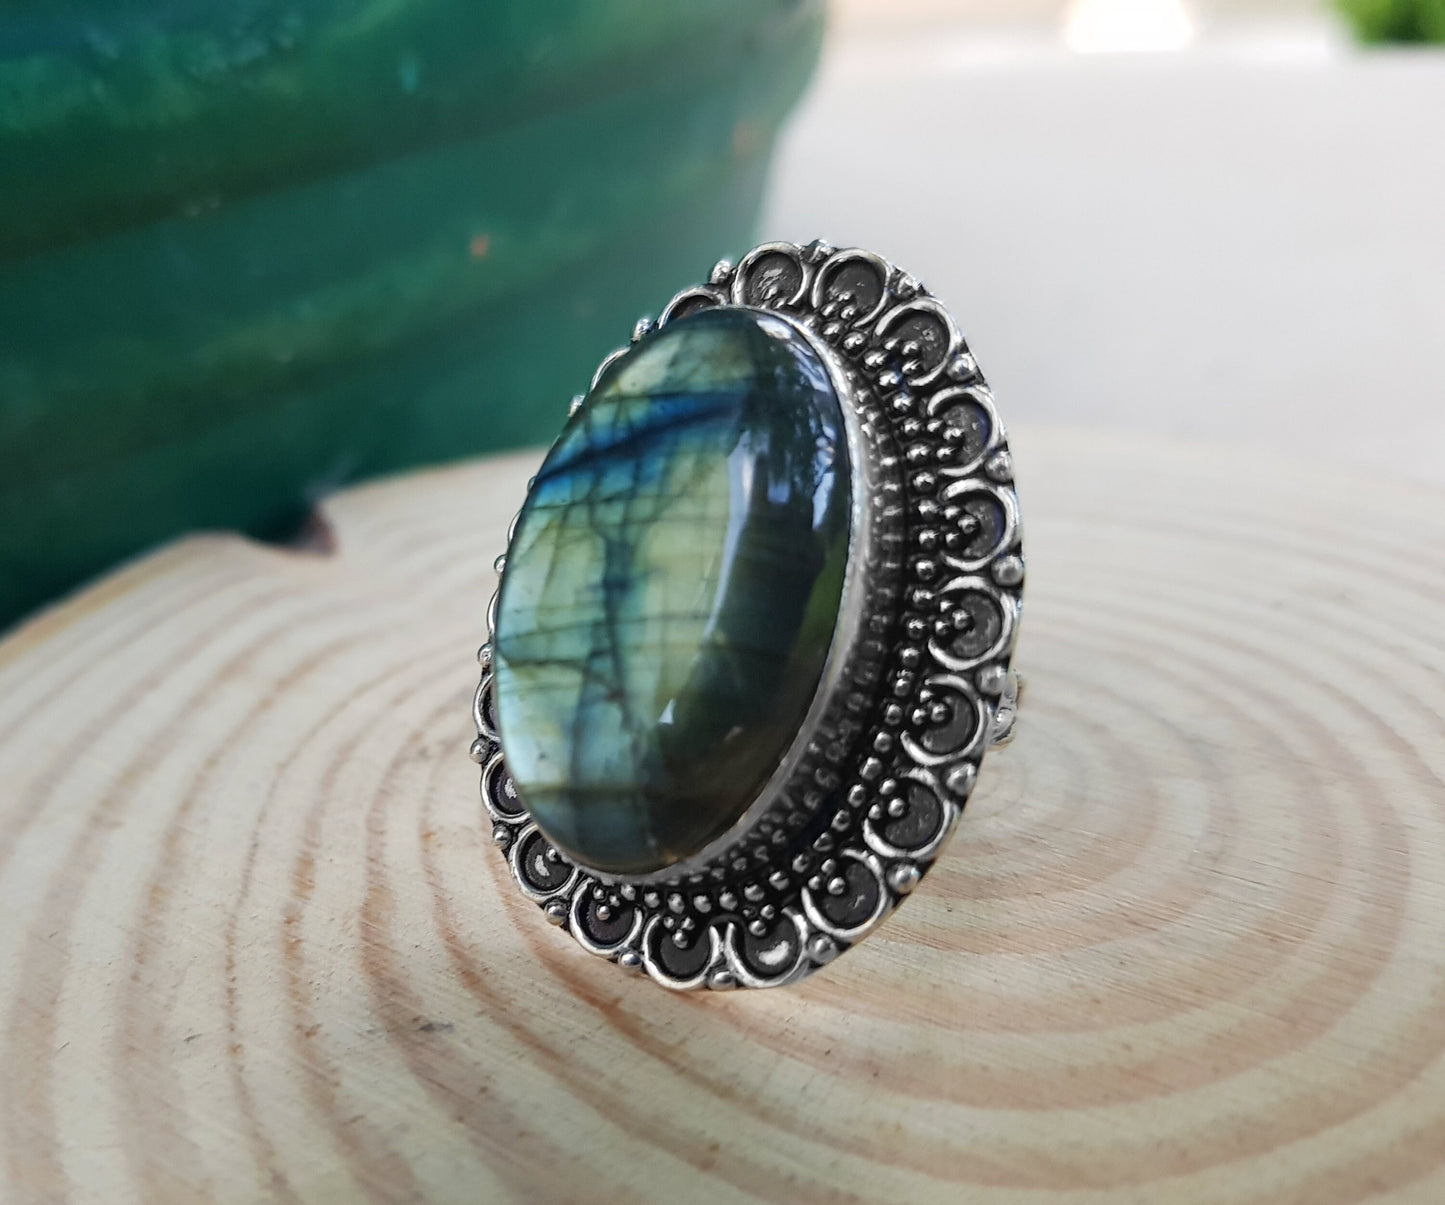 Labradorite Gemstone Ring In Sterling Silver Size US 8 3/4, Statement Ring, Crystal Ring, Boho Rings, Gypsy Jewelry Unique Gift